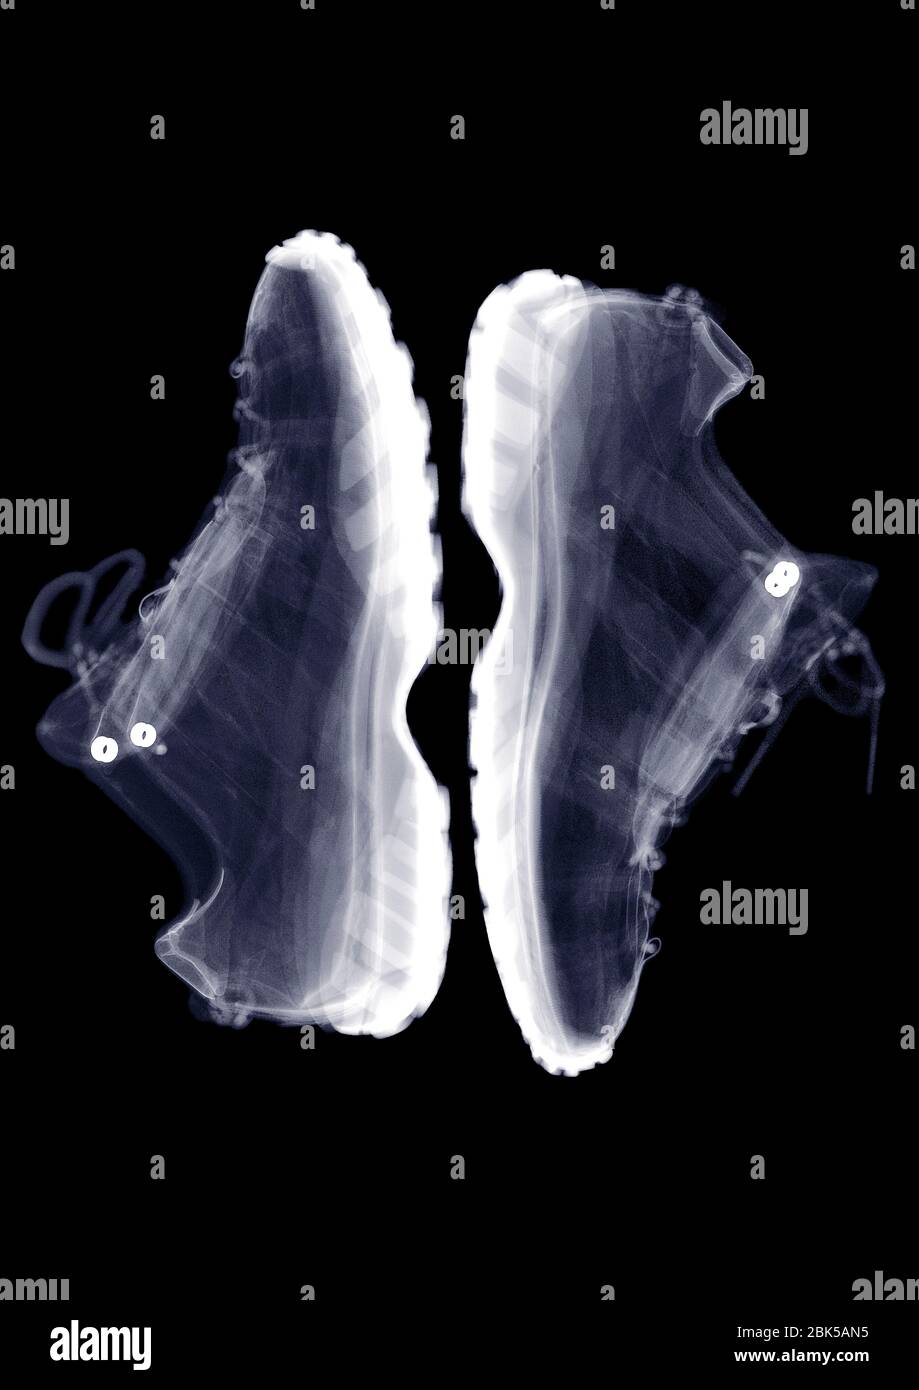 Trainers, X-ray. Stock Photo